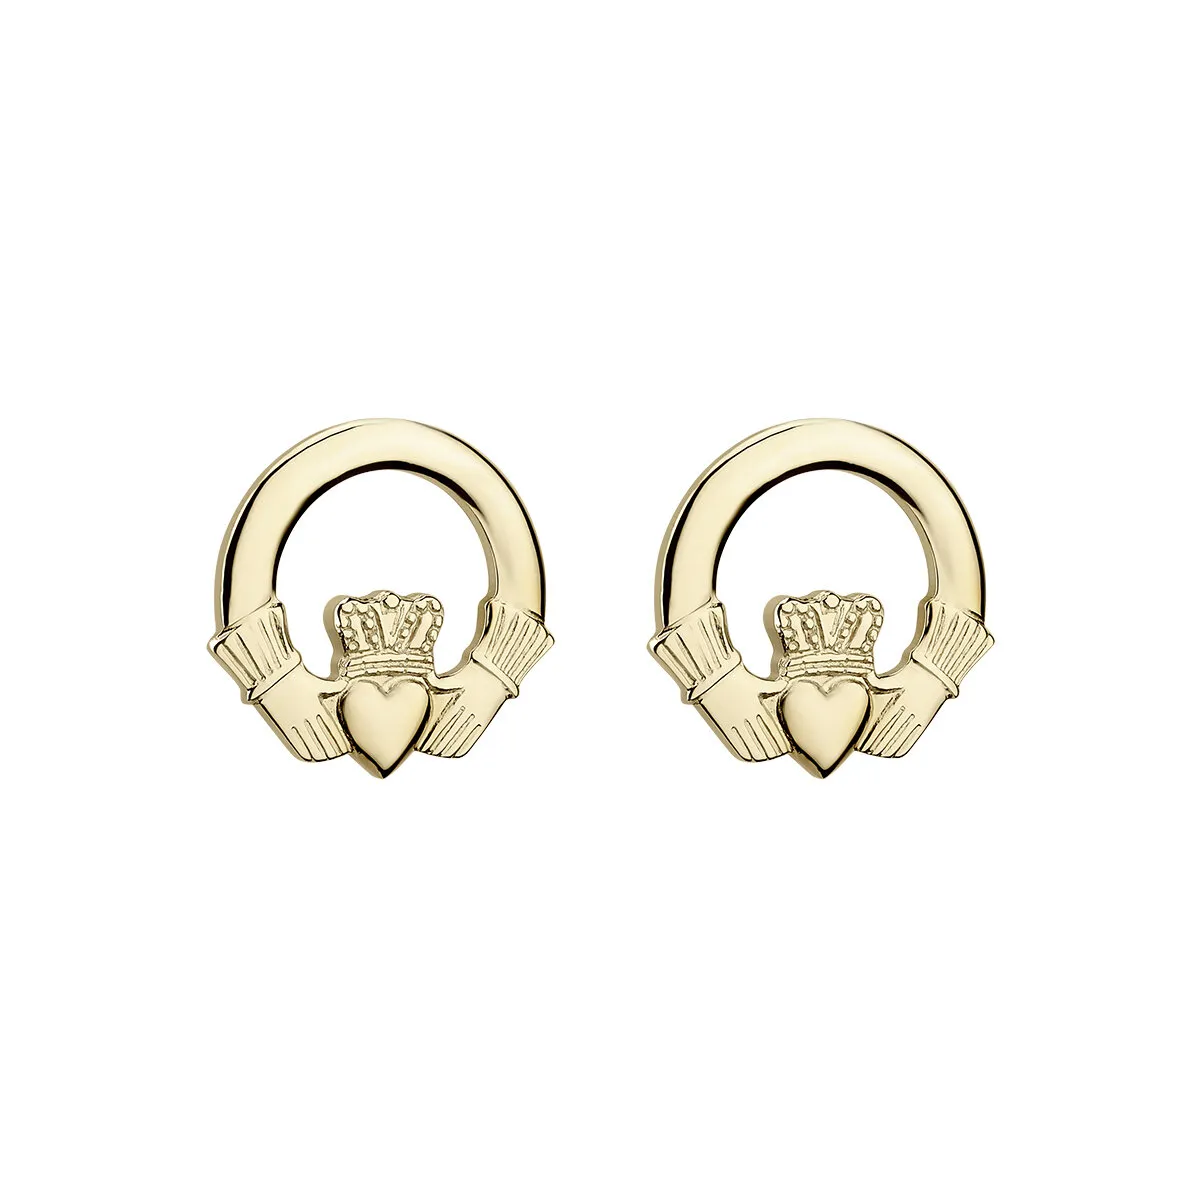 Claddagh Small Stud Earrings in 14k Gold...